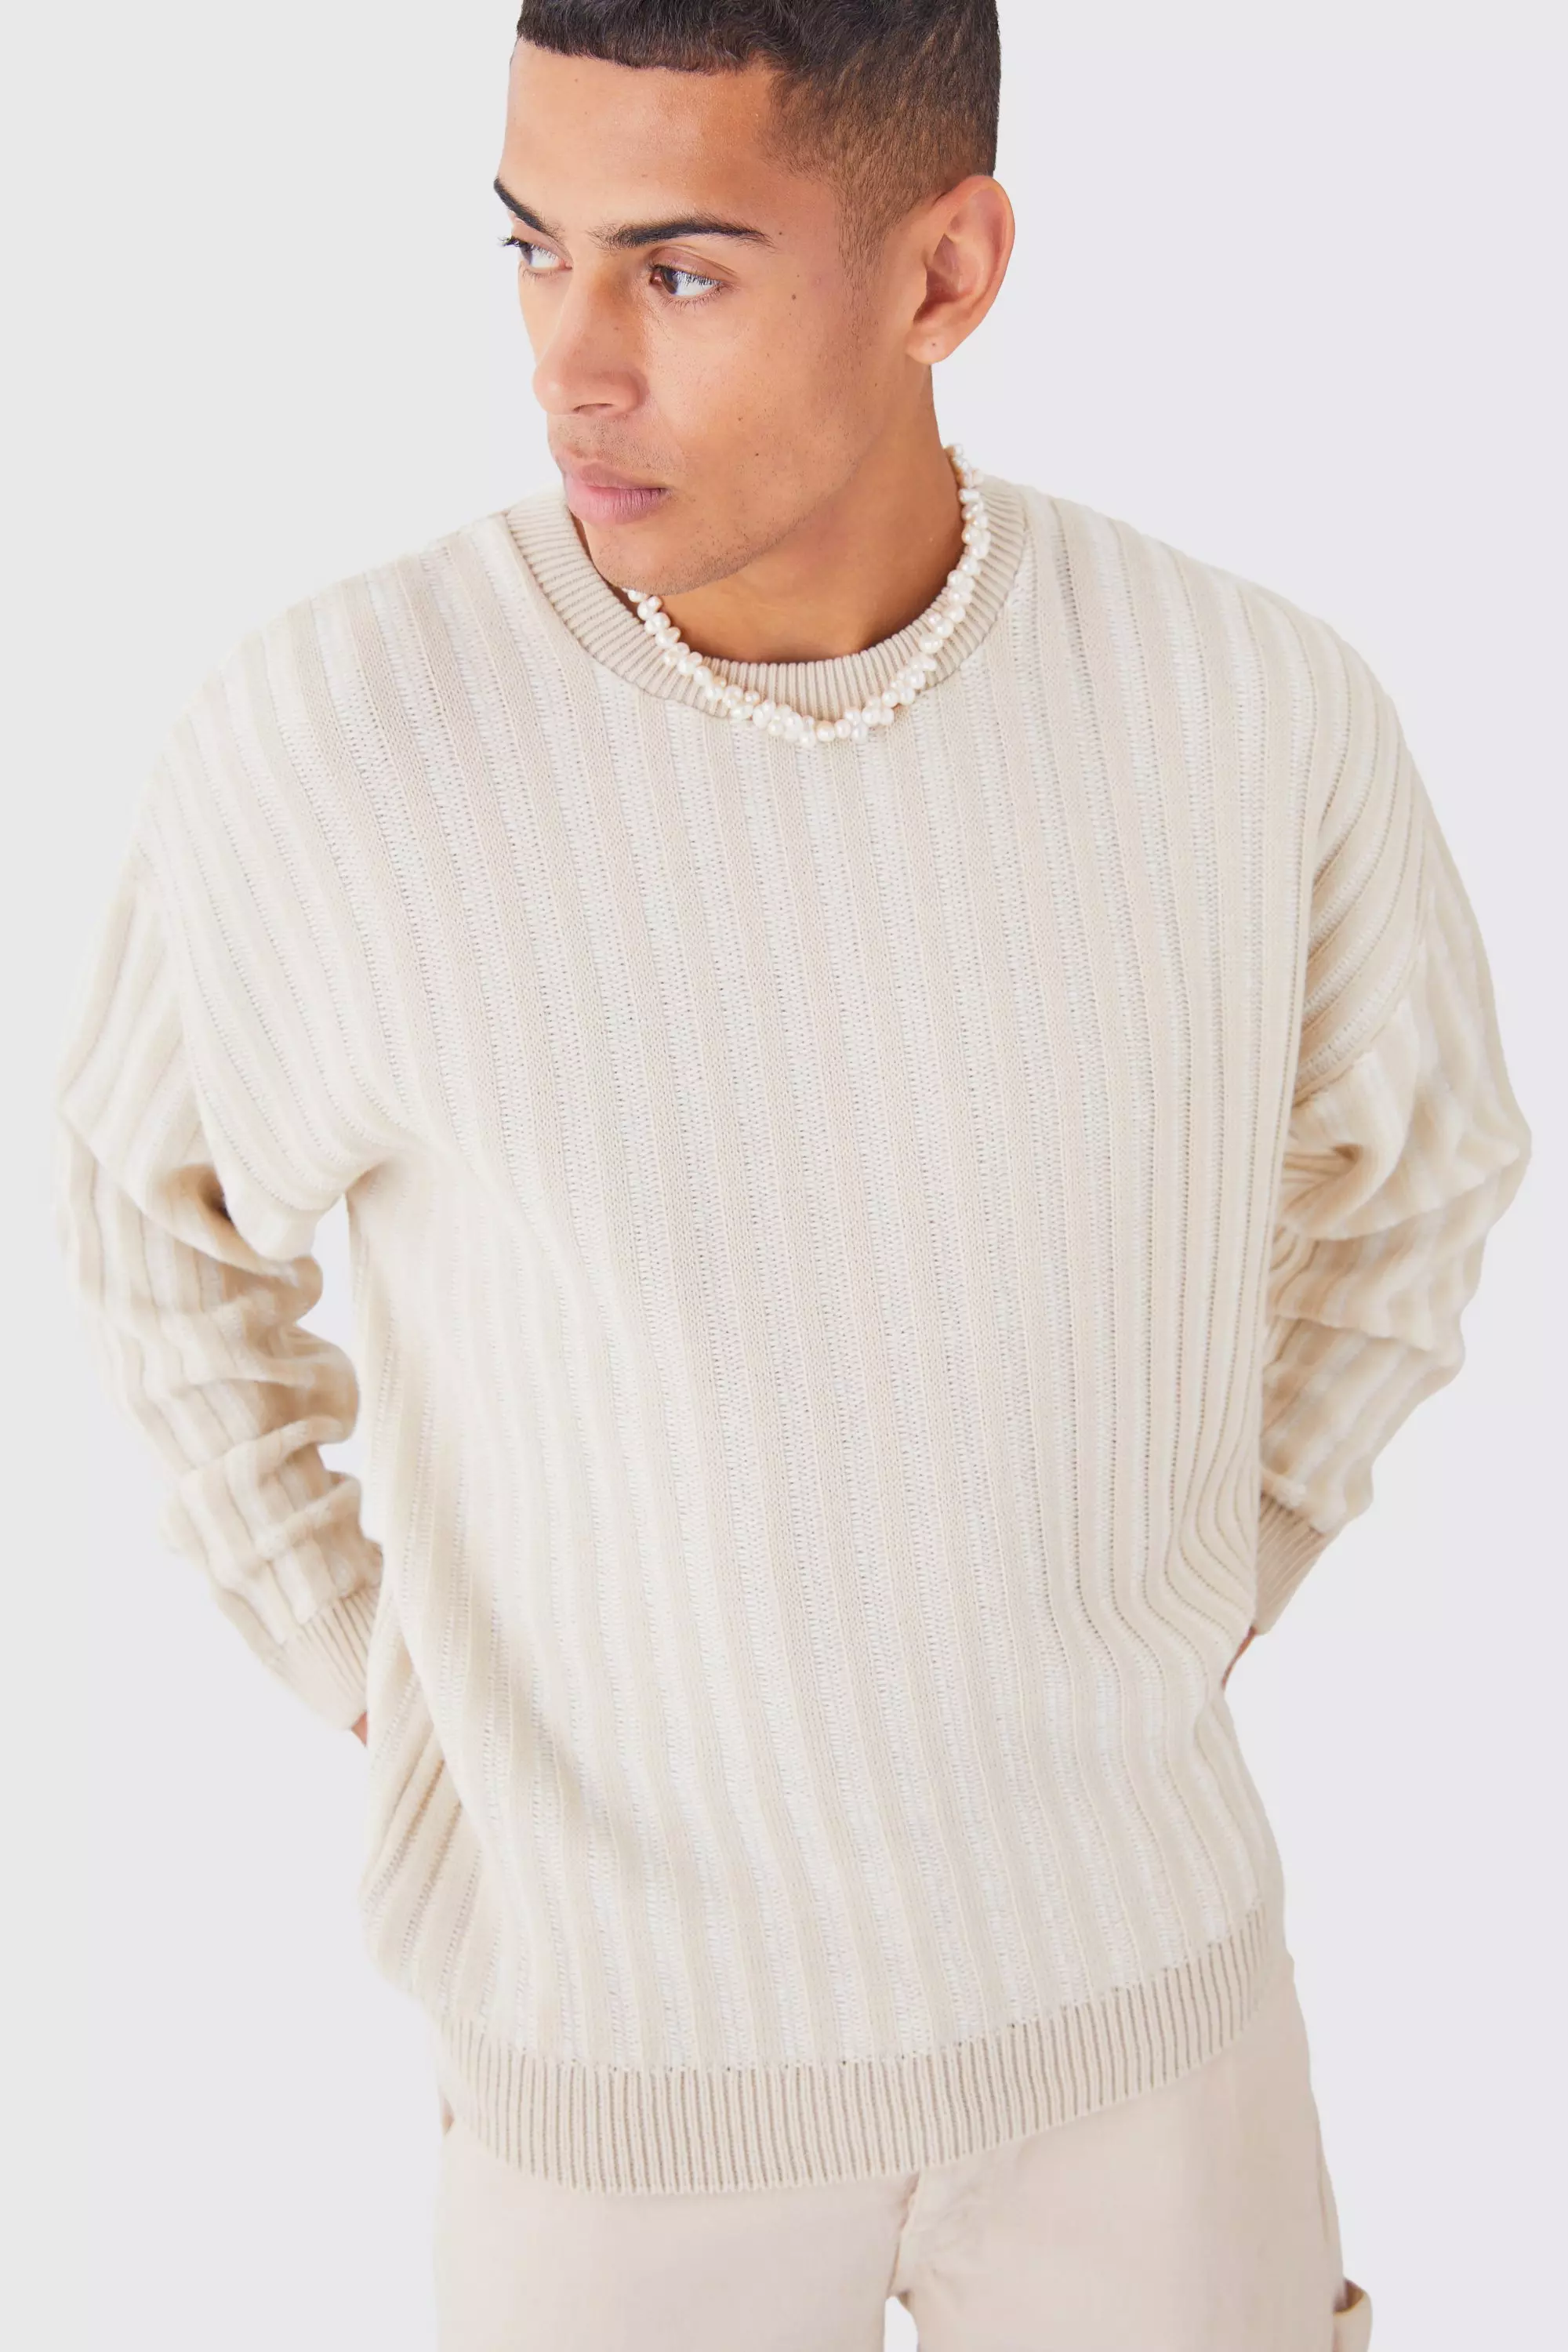 Oversized Crew Neck Two Tone Rib Knitted Jumper